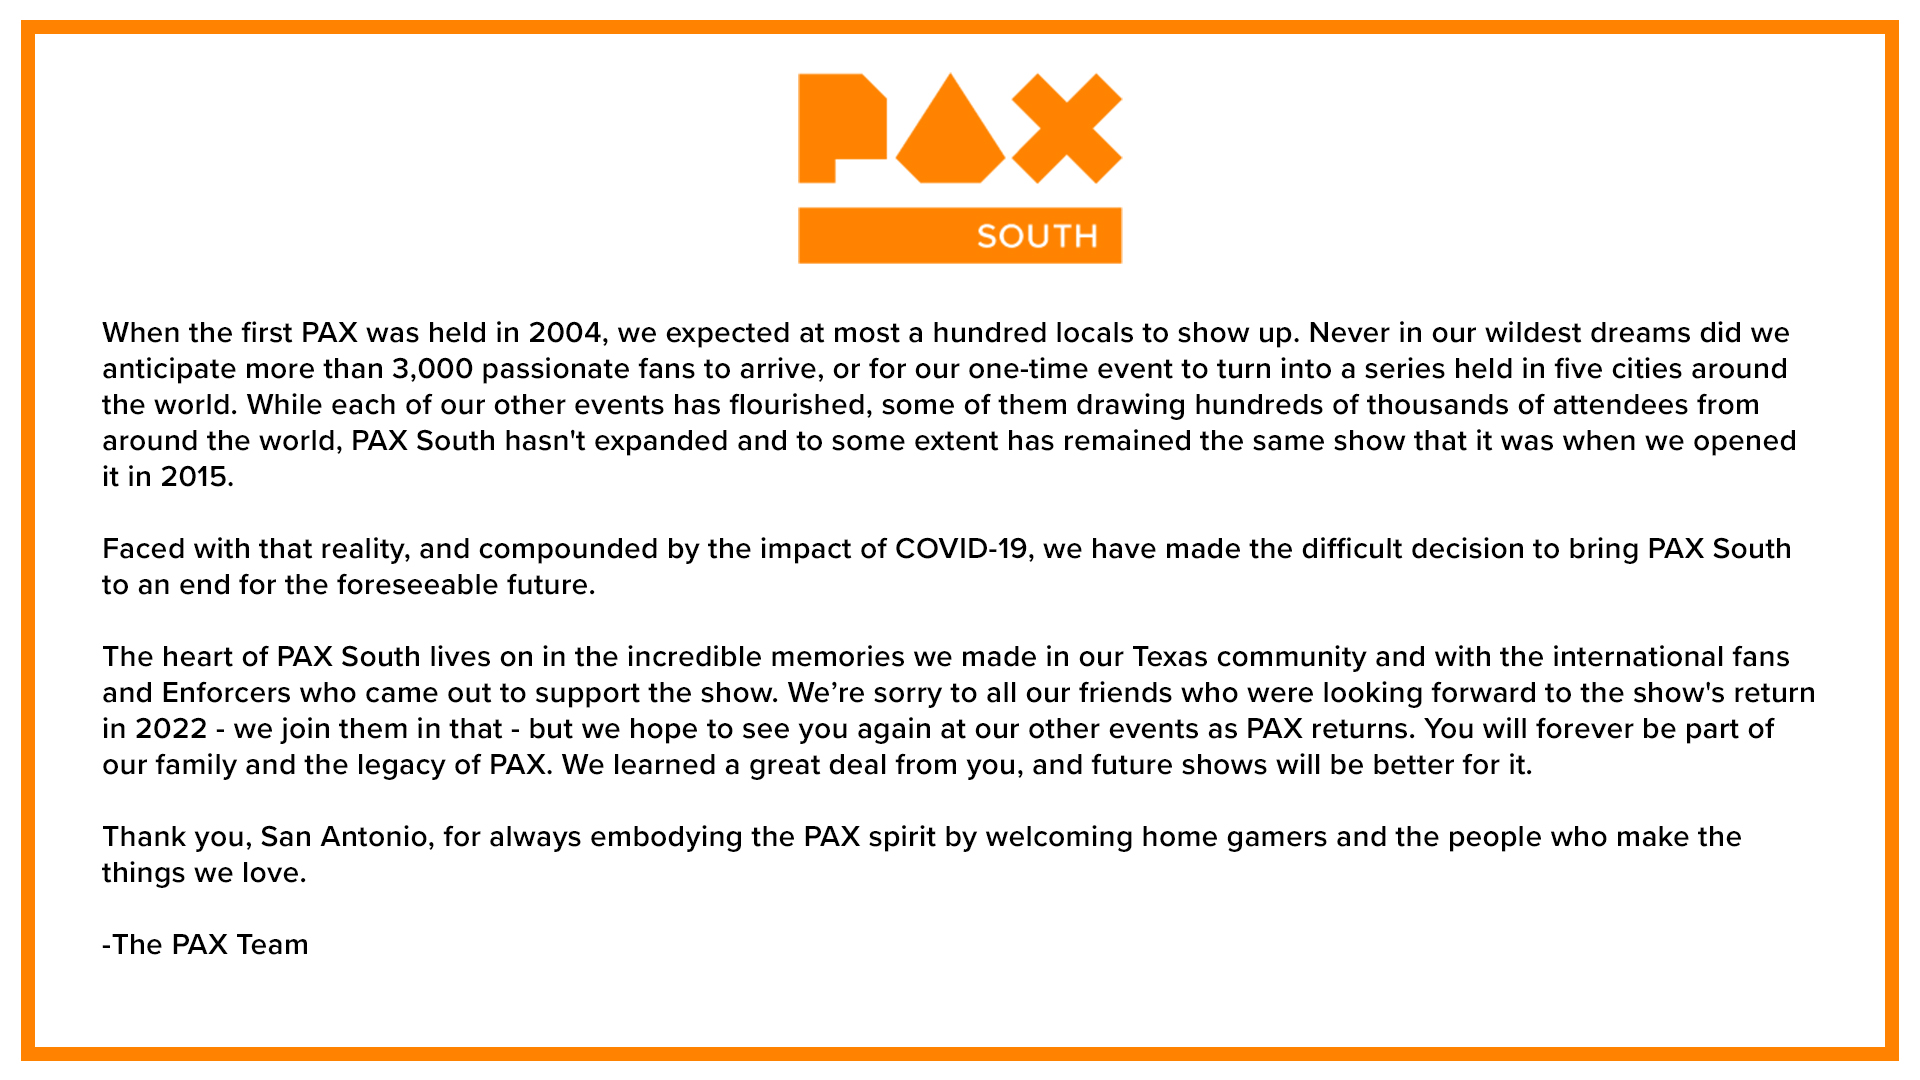 We have made the difficult decision to bring PAX South to an end for the foreseeable future. See the full statement at south.paxsite.com